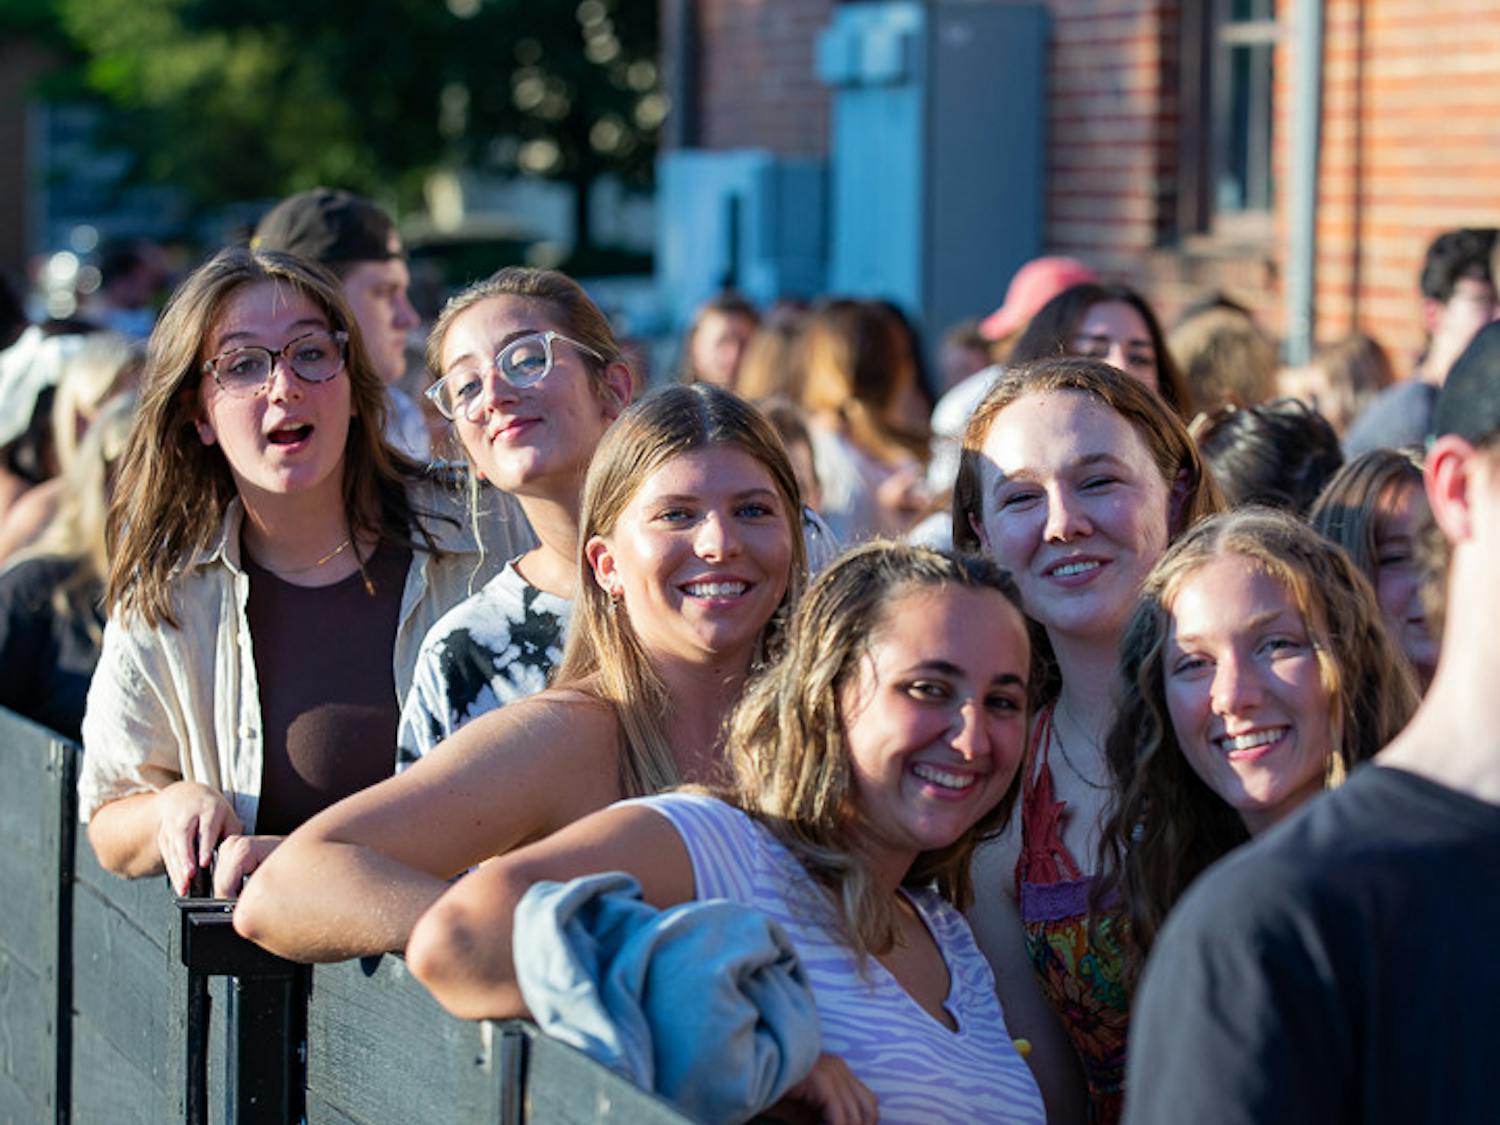 Fans waiting in line pose in front of the camera before The Band CAMINO concert on Sept. 15, 2022. Doors opened up at 6:30 p.m. and the show began at 7:30 p.m.